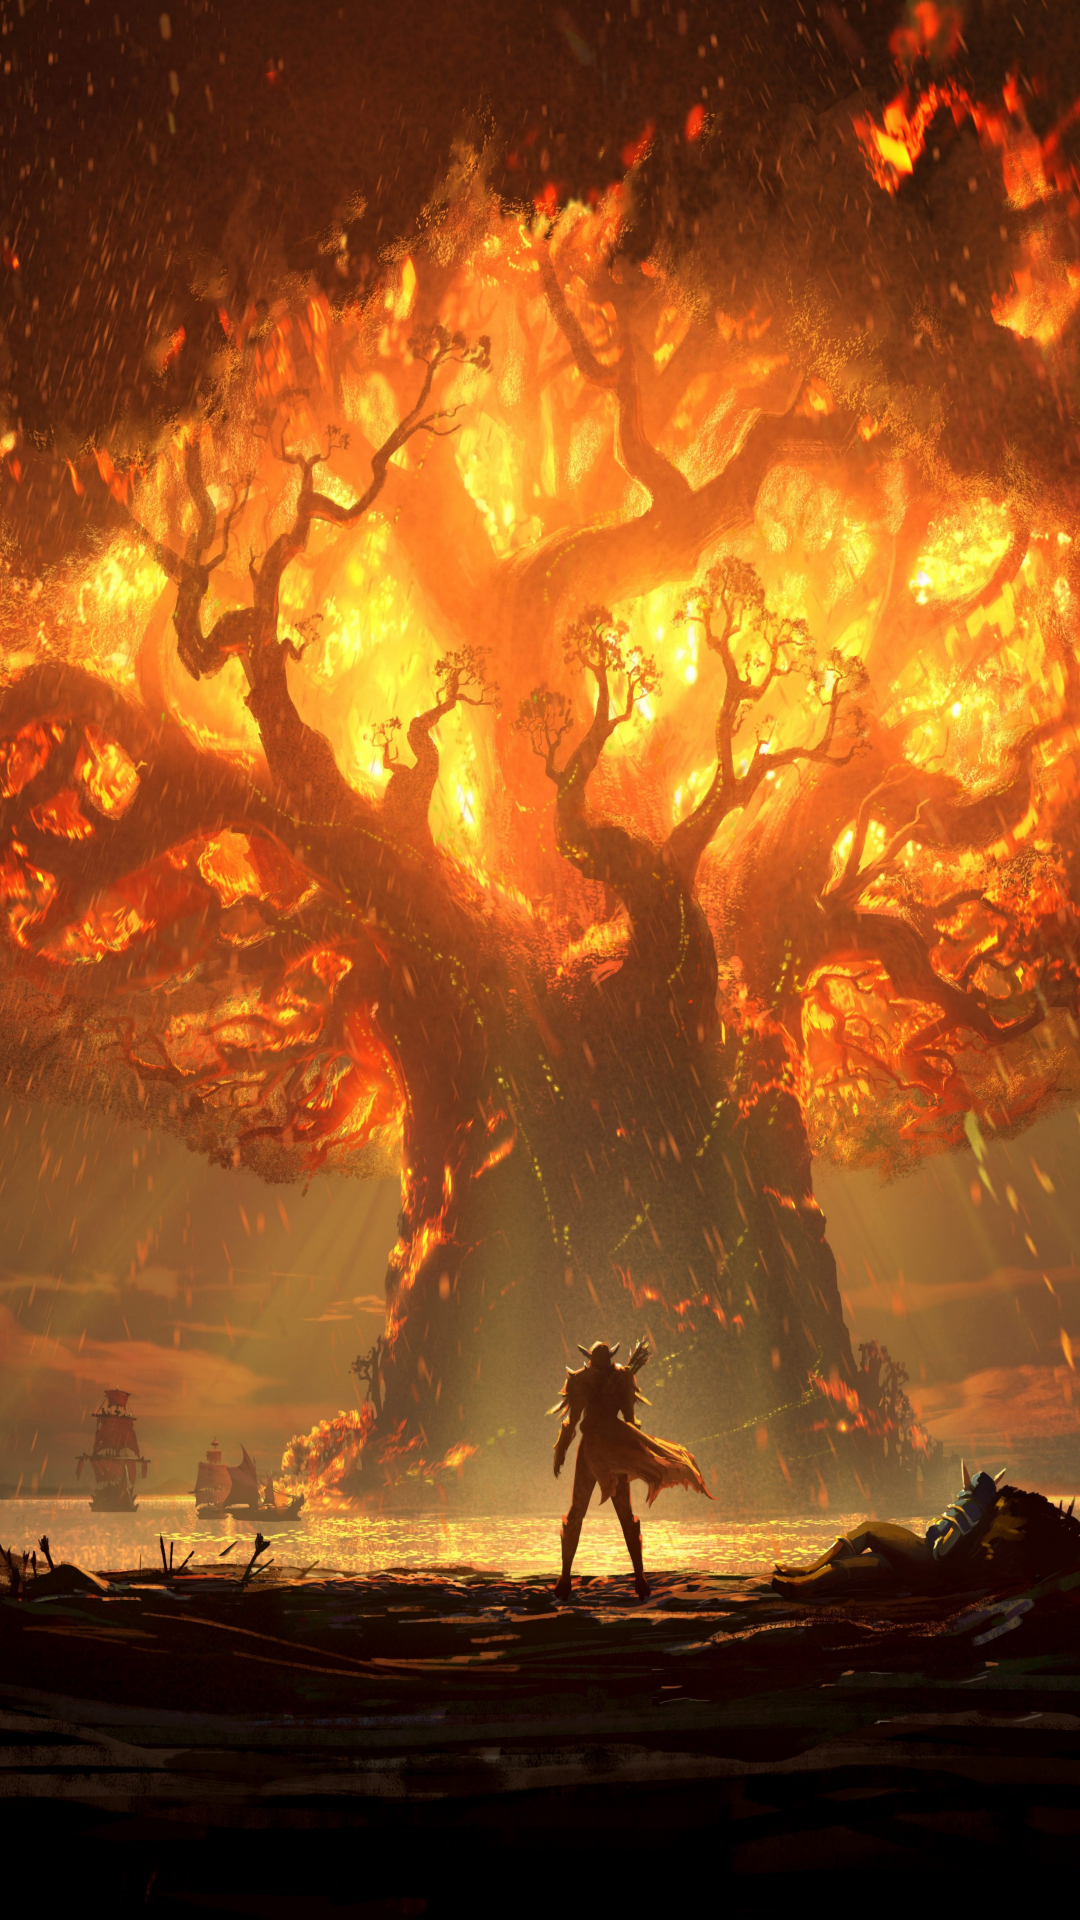 Download 1080x19 Wallpaper World Of Warcraft Battle For Azeroth Teldrassil Burns Video Game Samsung Galaxy S4 S5 Note Sony Xperia Z Z1 Z2 Z3 Htc One Lenovo Vibe Google Pixel 2 Oneplus